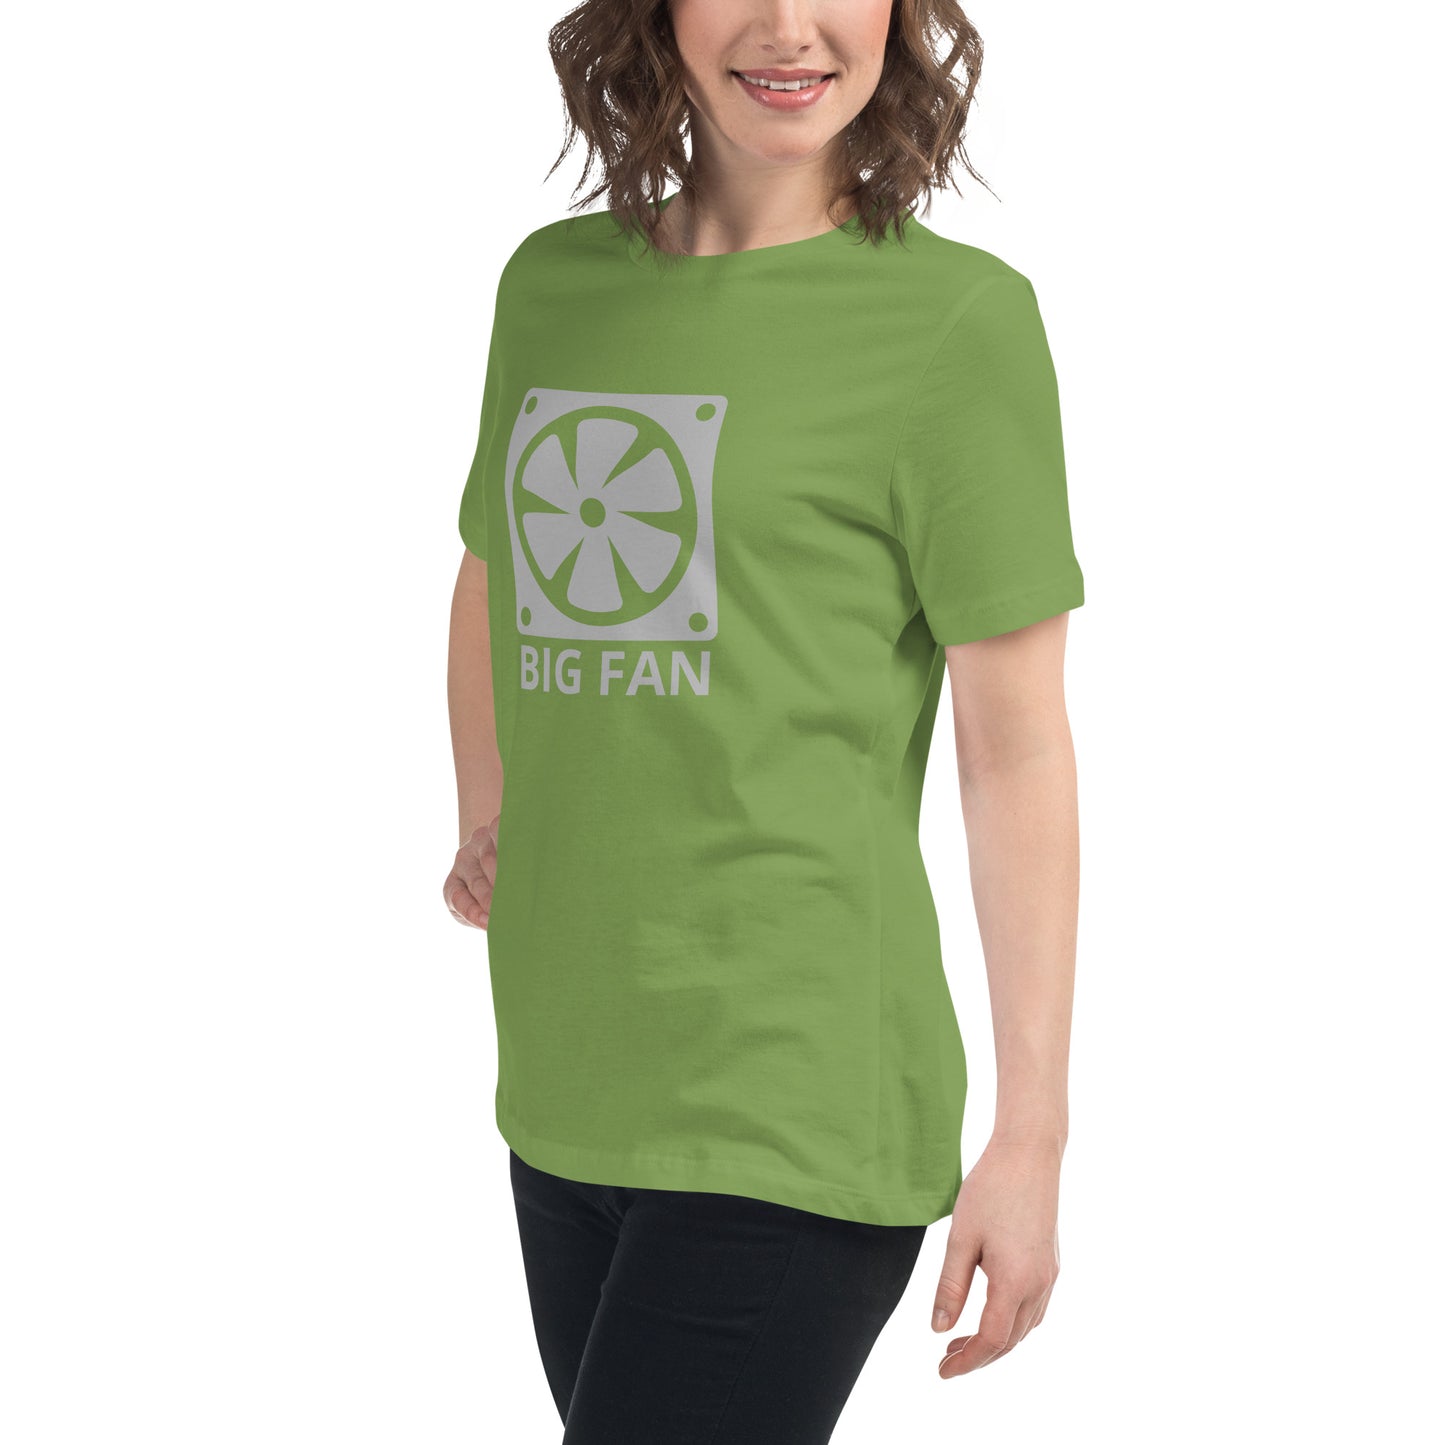 Women with leaf green t-shirt with image of a big computer fan and the text "BIG FAN"